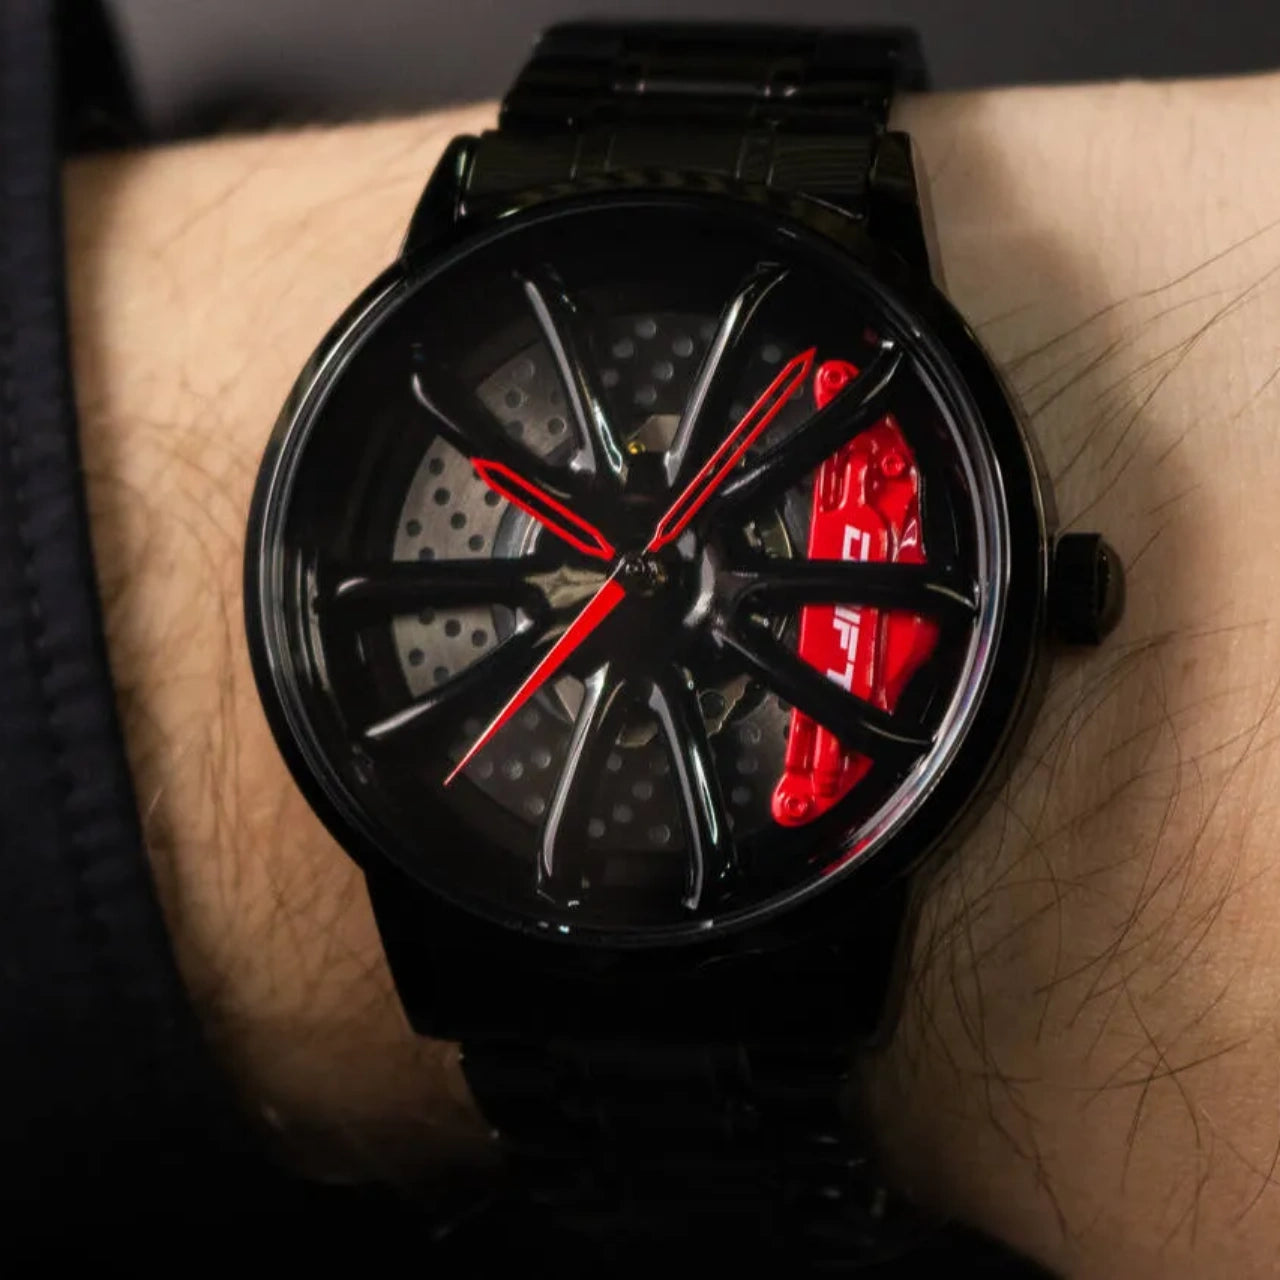 Illuminate your automotive passion with our striking red Performance GT Rim Watch! Meticulously crafted by a German startup, these precision watches are designed to captivate motorsport, tuning, and auto aficionados. Get ready to ignite your passion in style! #id_46744365400394